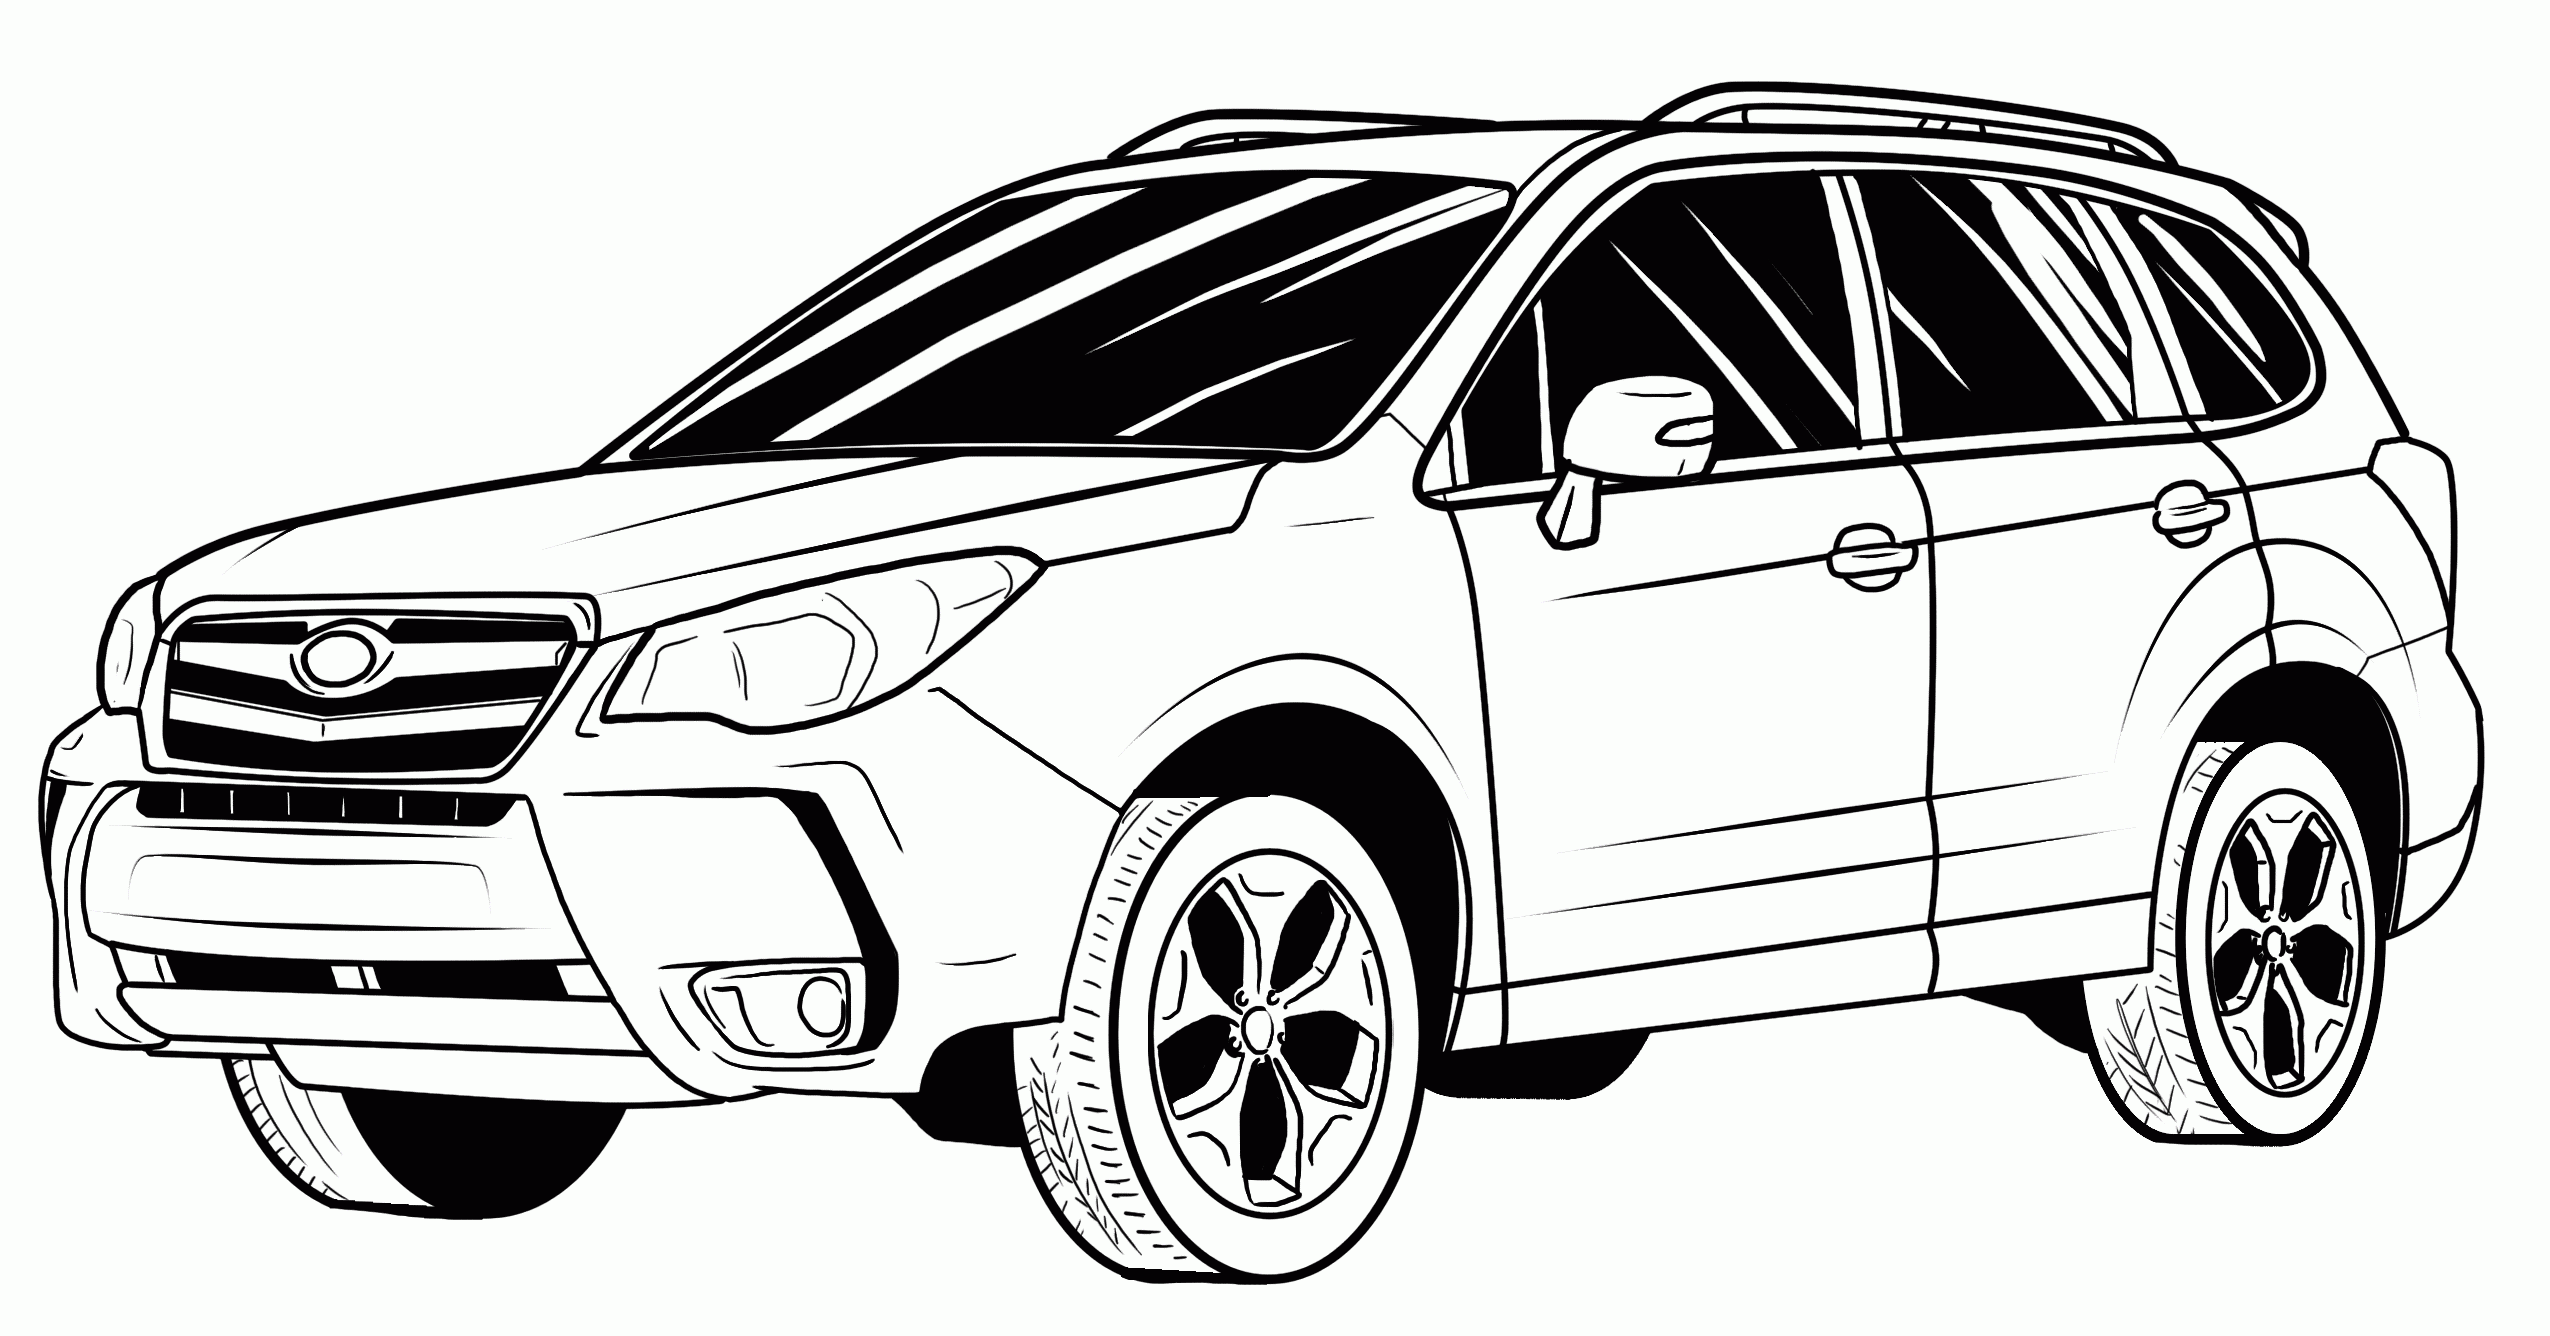 how-to-draw-an-suv-step-16_1_000000135357_5